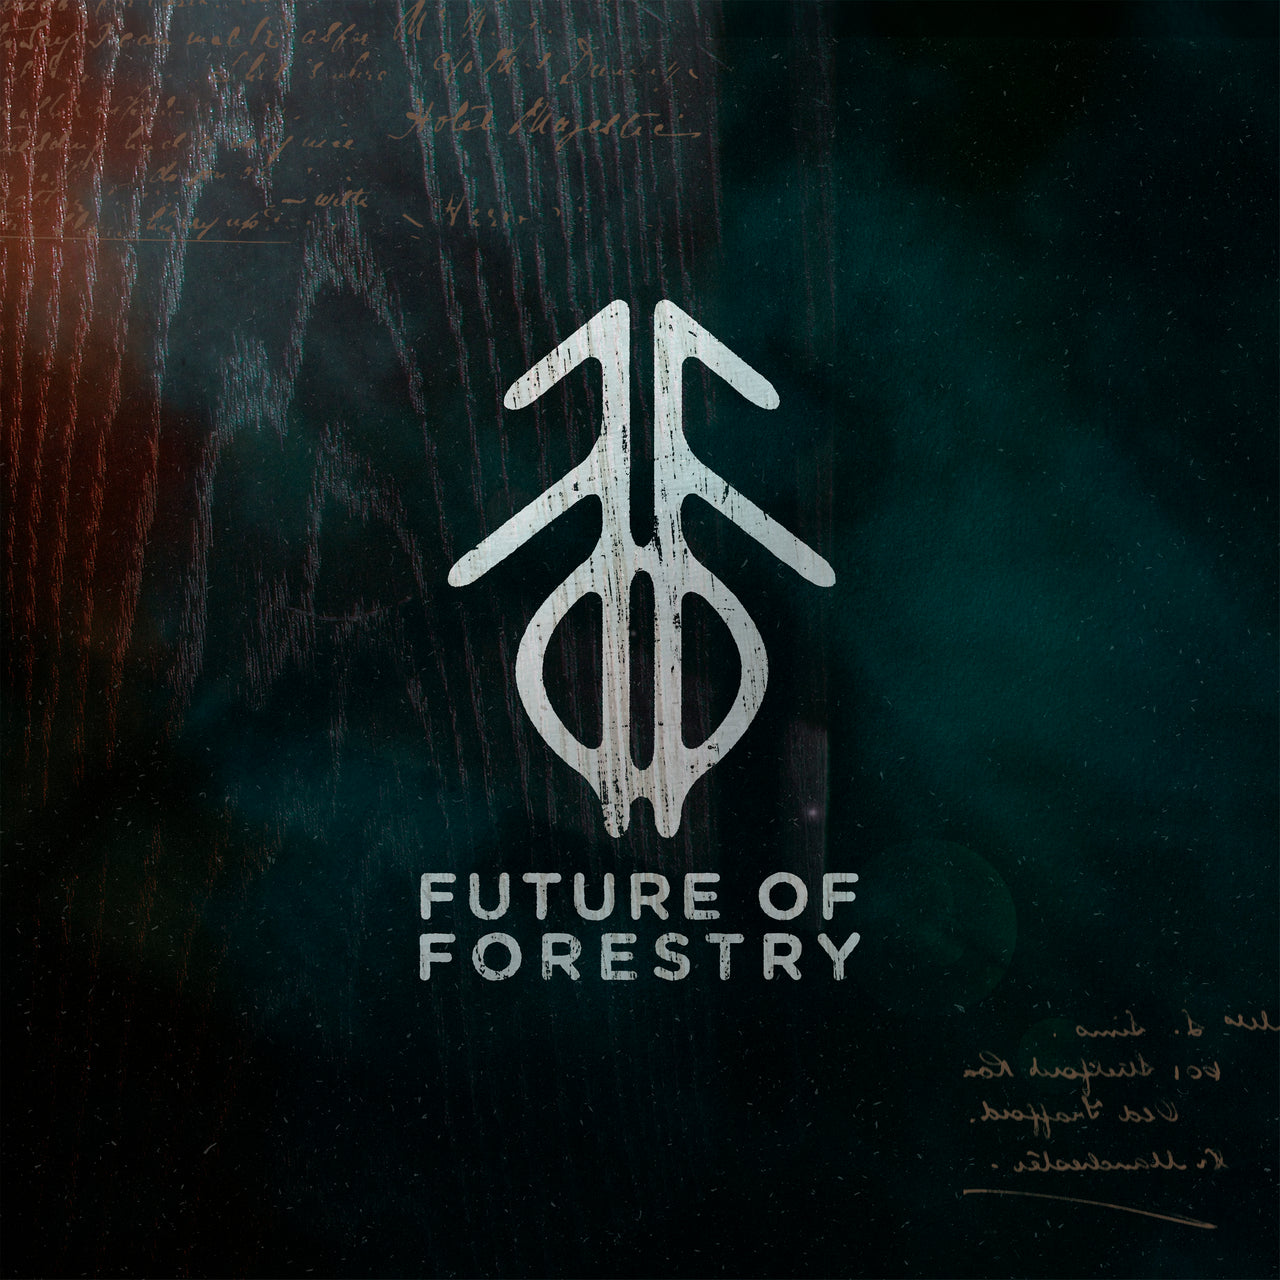 Future of Forestry: Remember CD